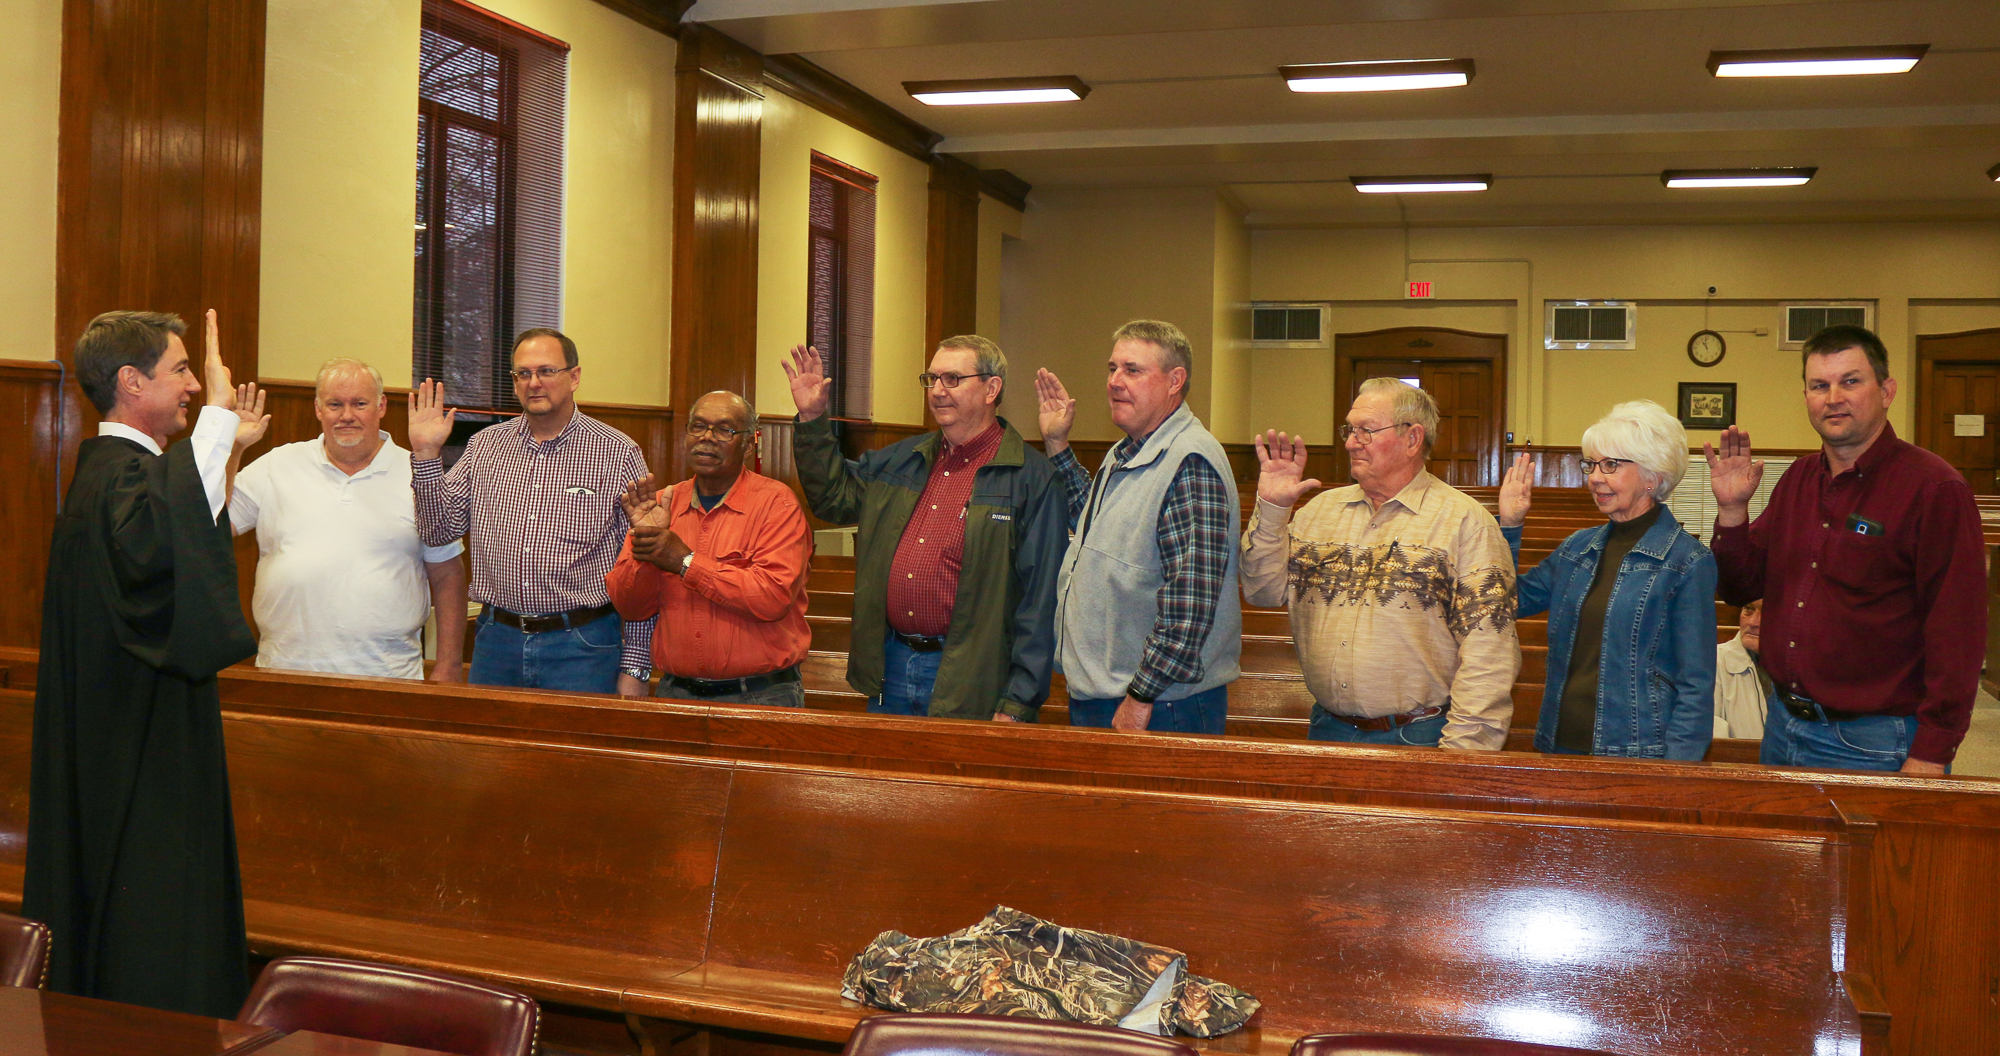 Justices of the Peace who were sworn in Jan. 2 by Judge Tom Cooper, at far left, included Jerry Harwell, Brent Pinkerton, Bobby Don Turner, Gary Welch, Kerry Strasner, Dick Wakefield, Janice Huffman and Kirk Bell. Welch and Bell are first-termers on the court.